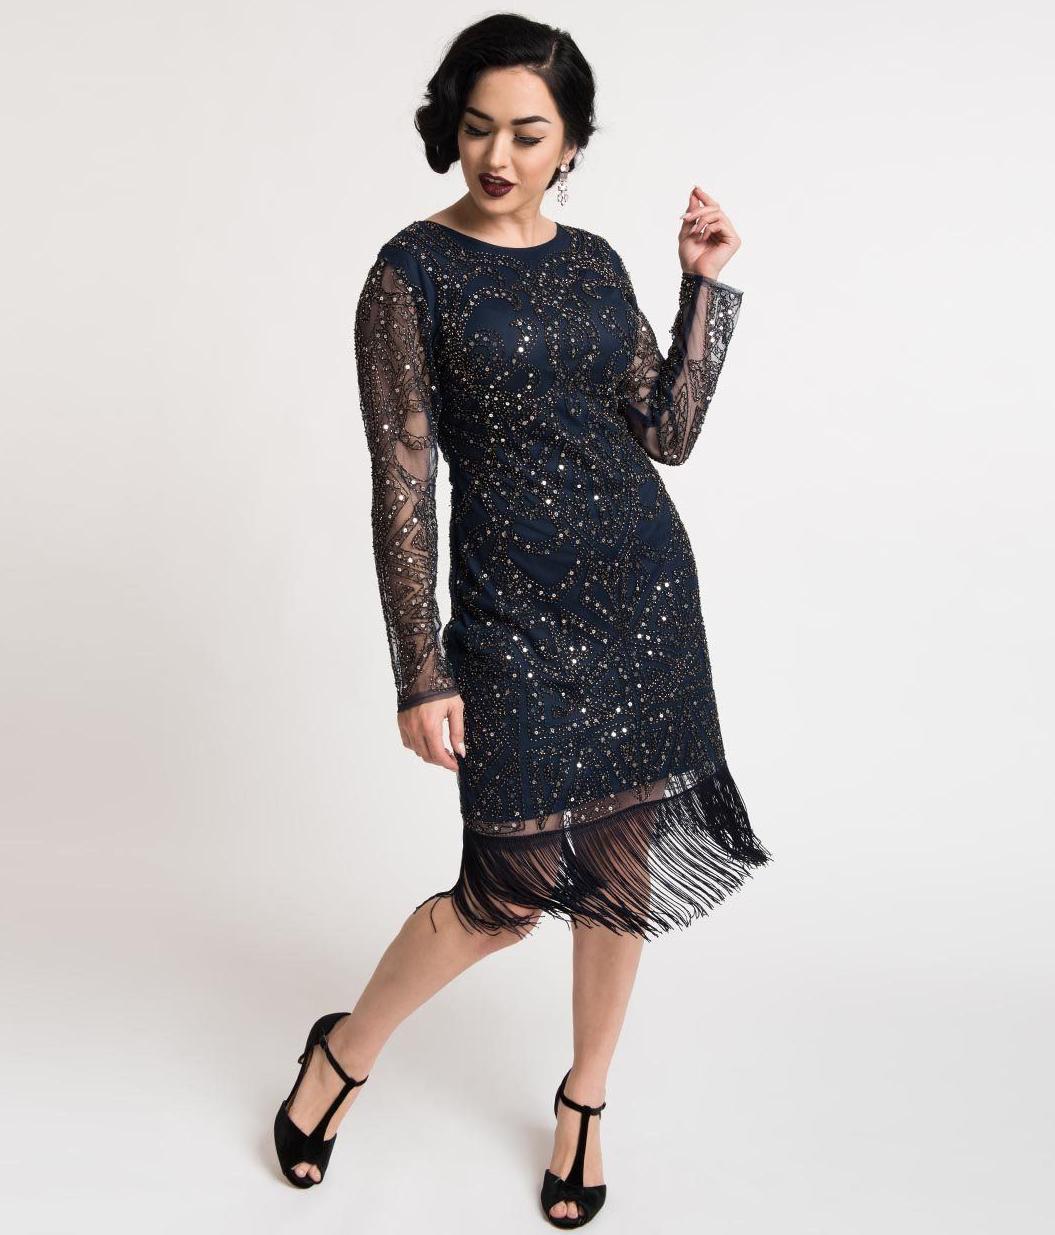 Black Sequin Cocktail Dresses With Sleeves: You Favorite Choice For Special Events